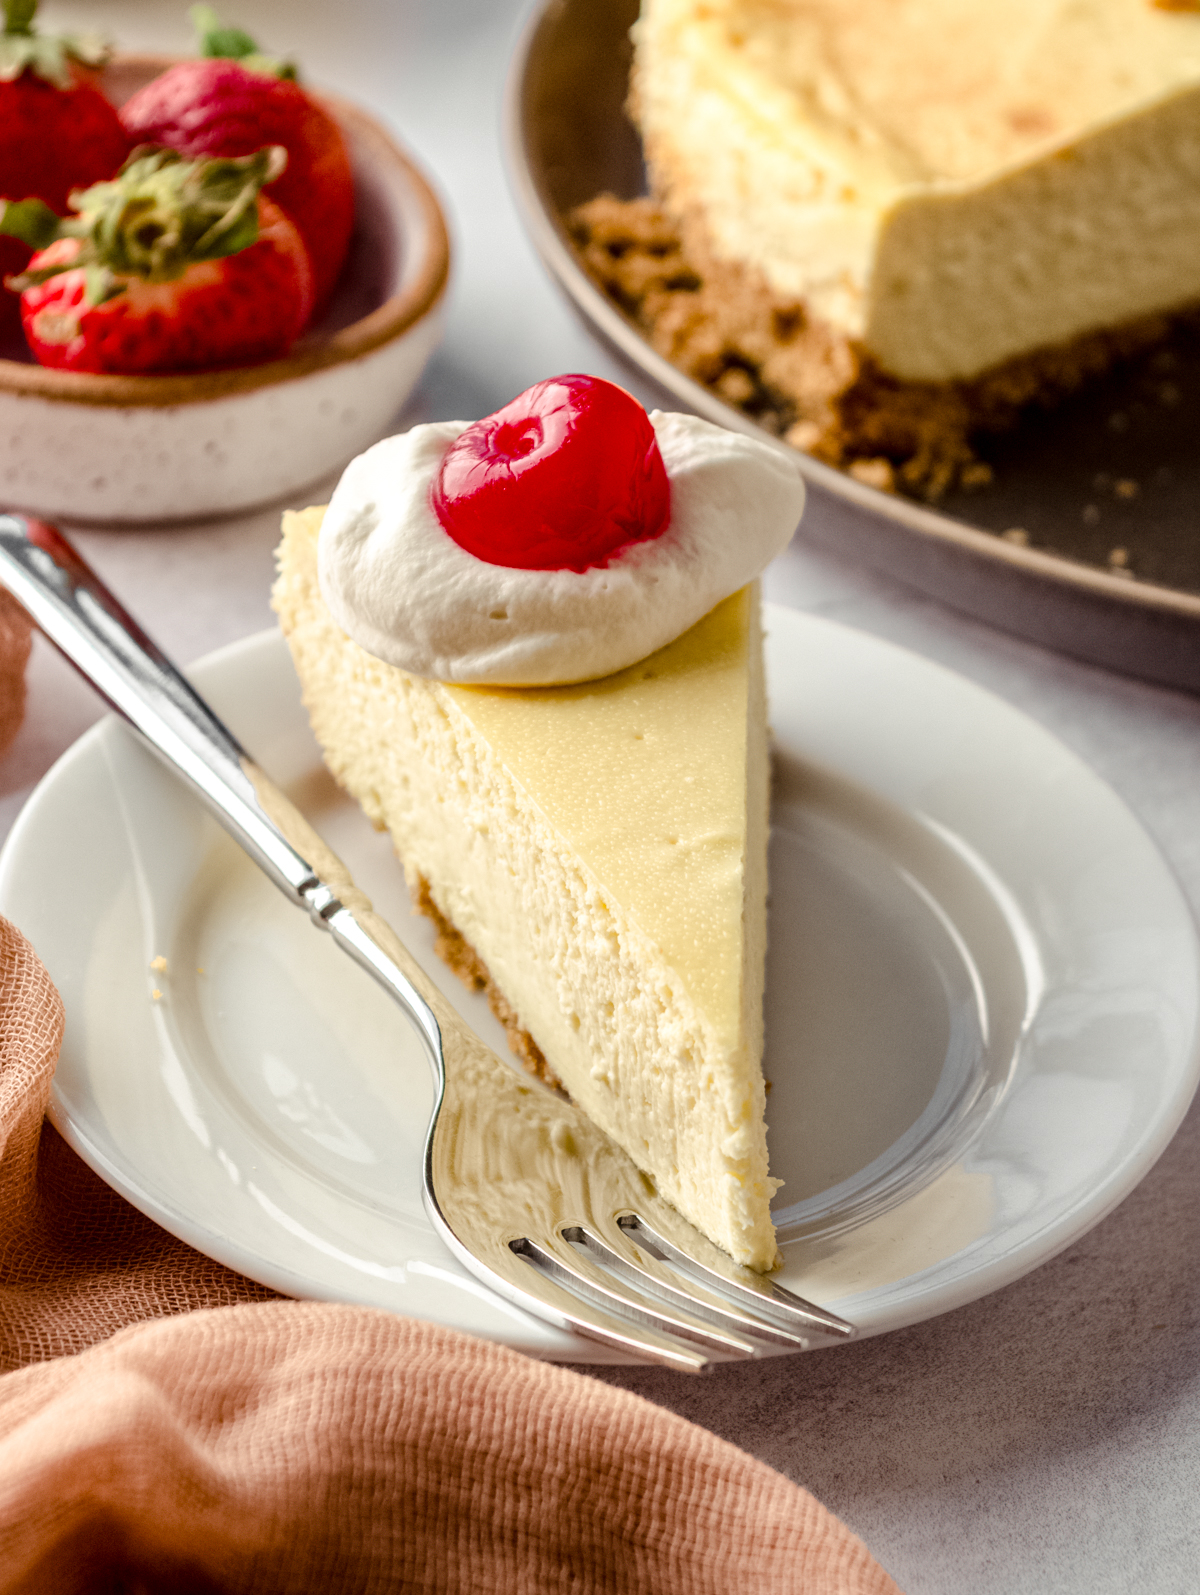 A slice of cheesecake on a plate. There is a dollop of whipped cream and a cherry on top of the slice.